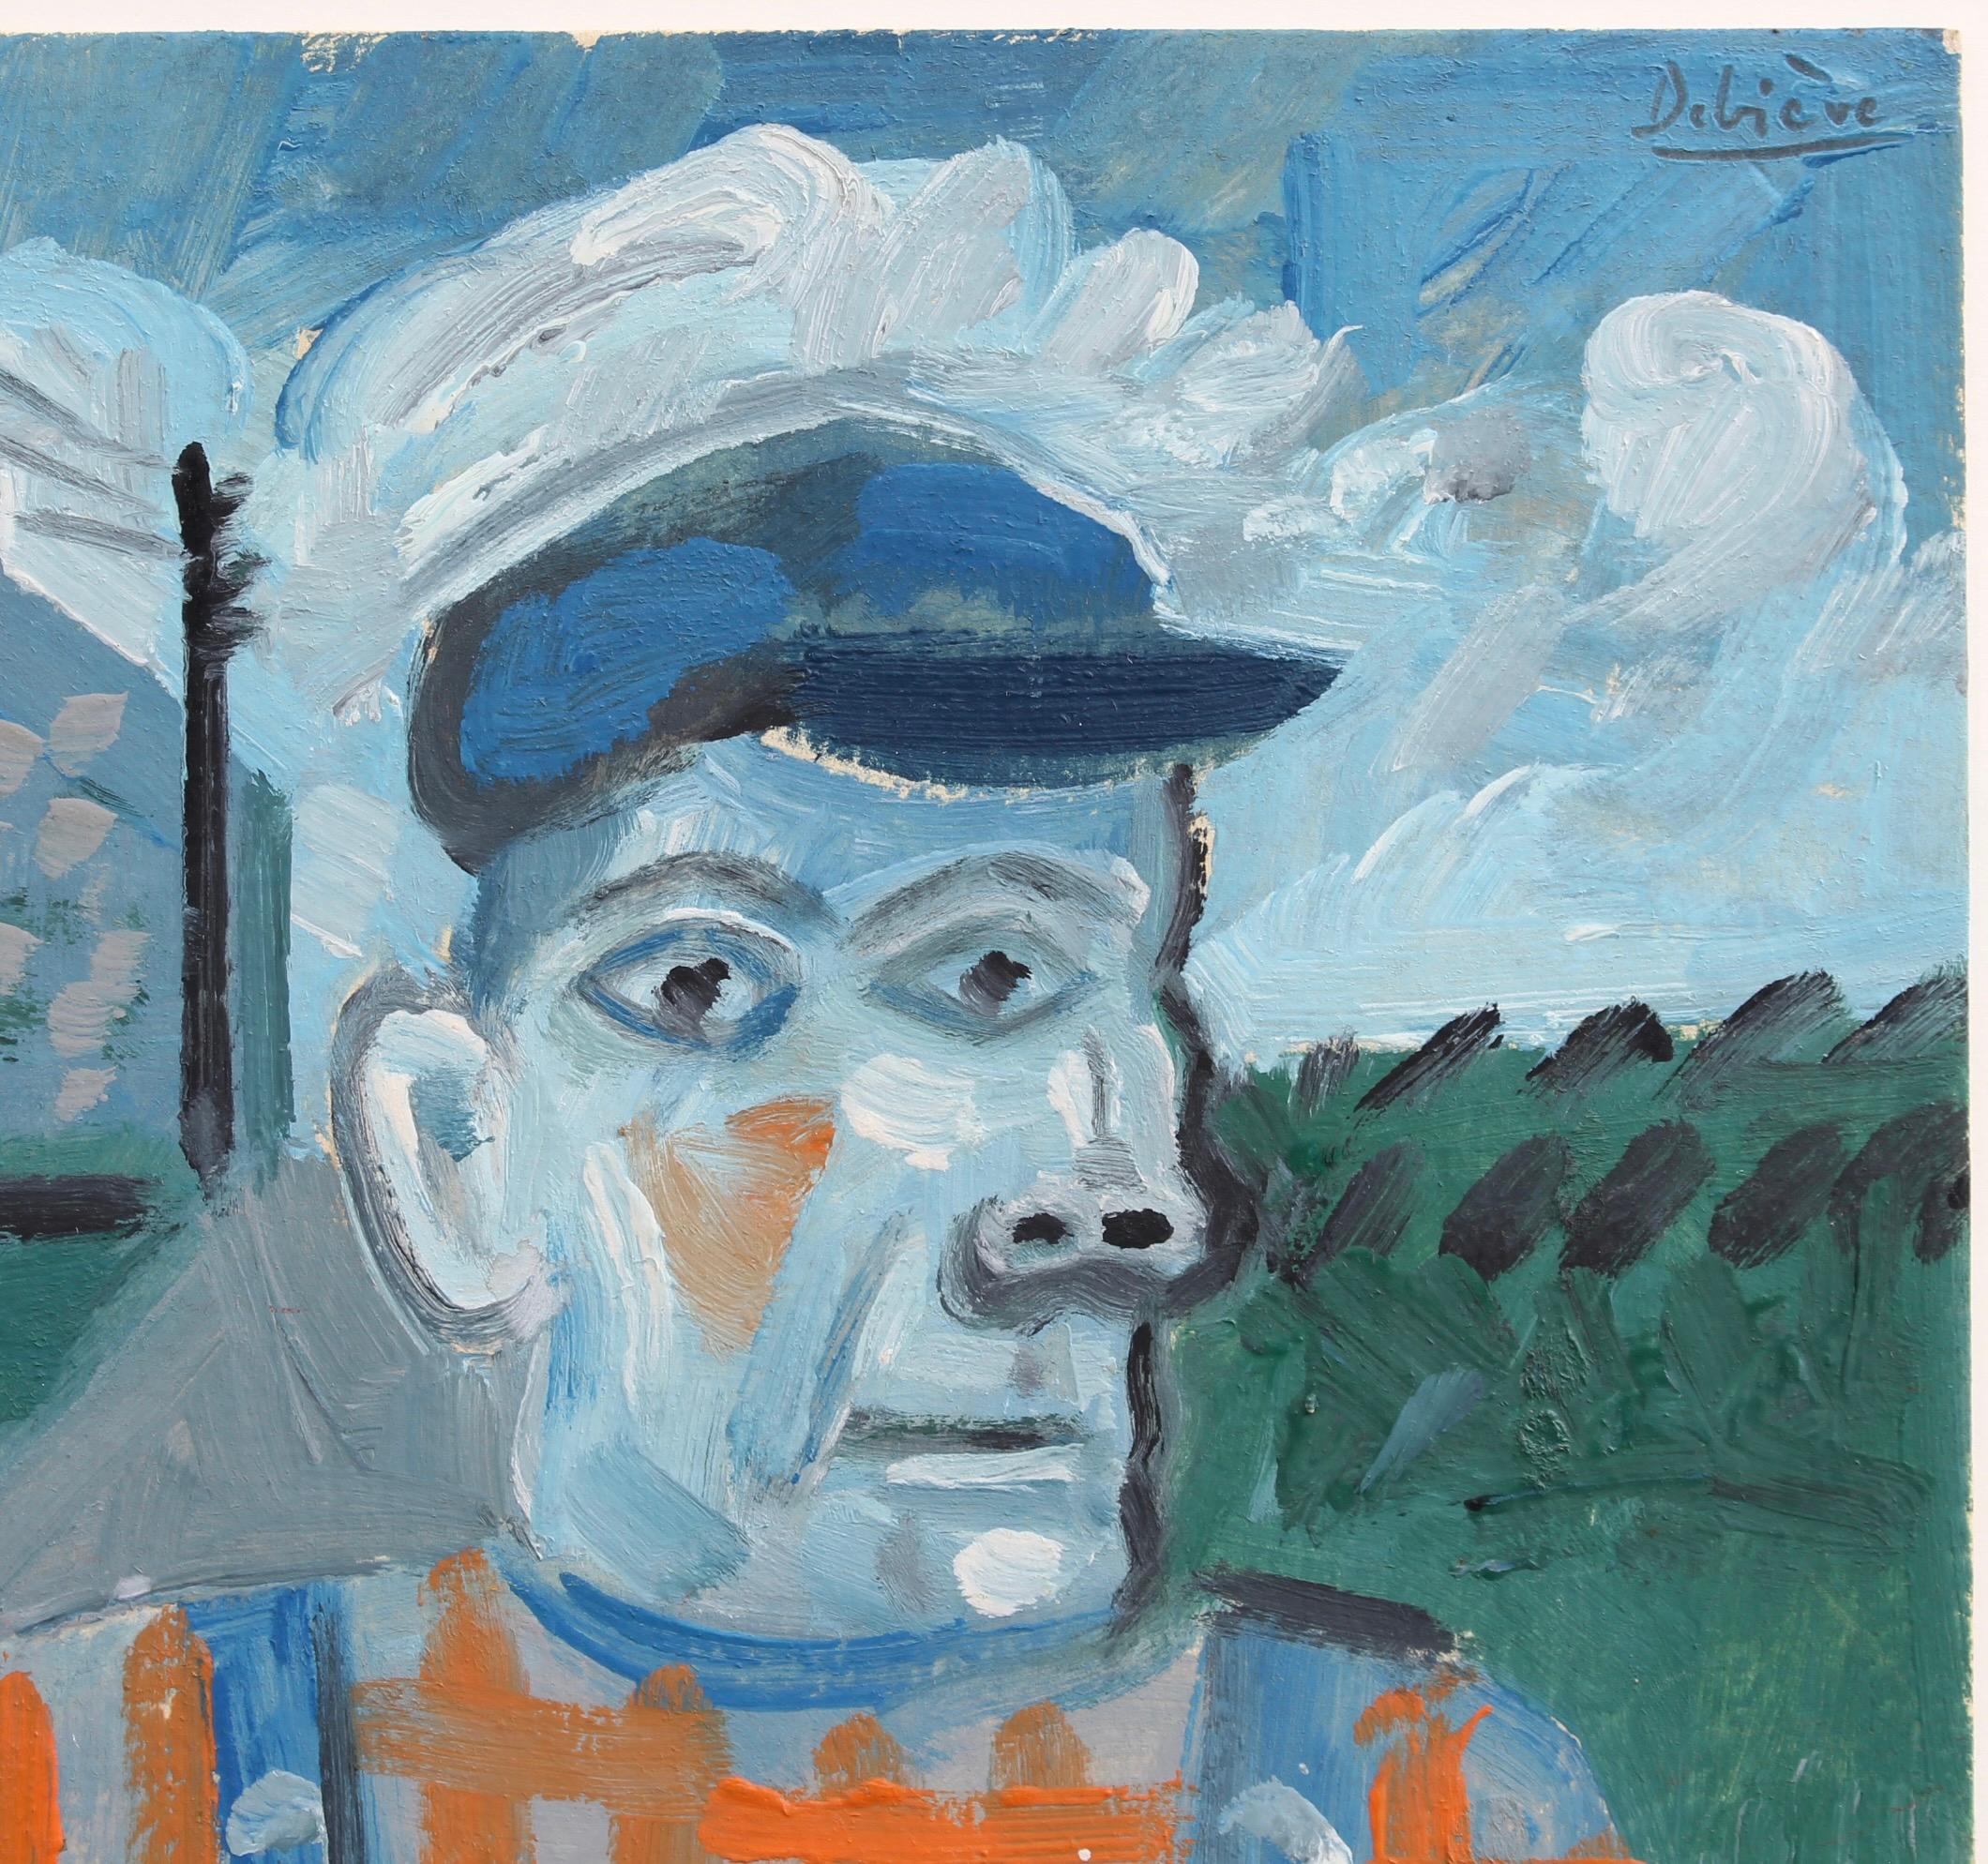 'Outstanding in His Field', oil on cardstock paper, by Raymond Debiève, 1976. The artist depicts a salt-of-the-earth farmer seated on a fence post, arms crossed with a look of wholehearted satisfaction. The artist often painted figures he met in the